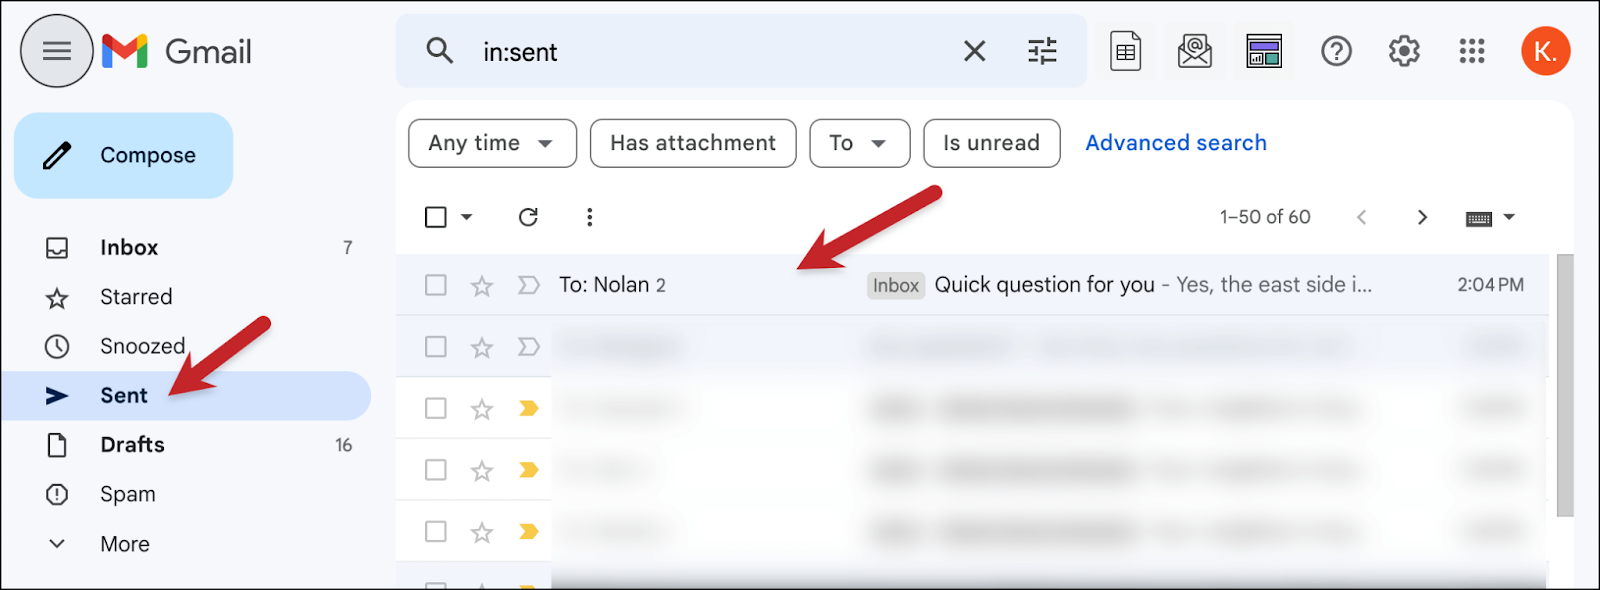 Sent items are in your Gmail sent folder